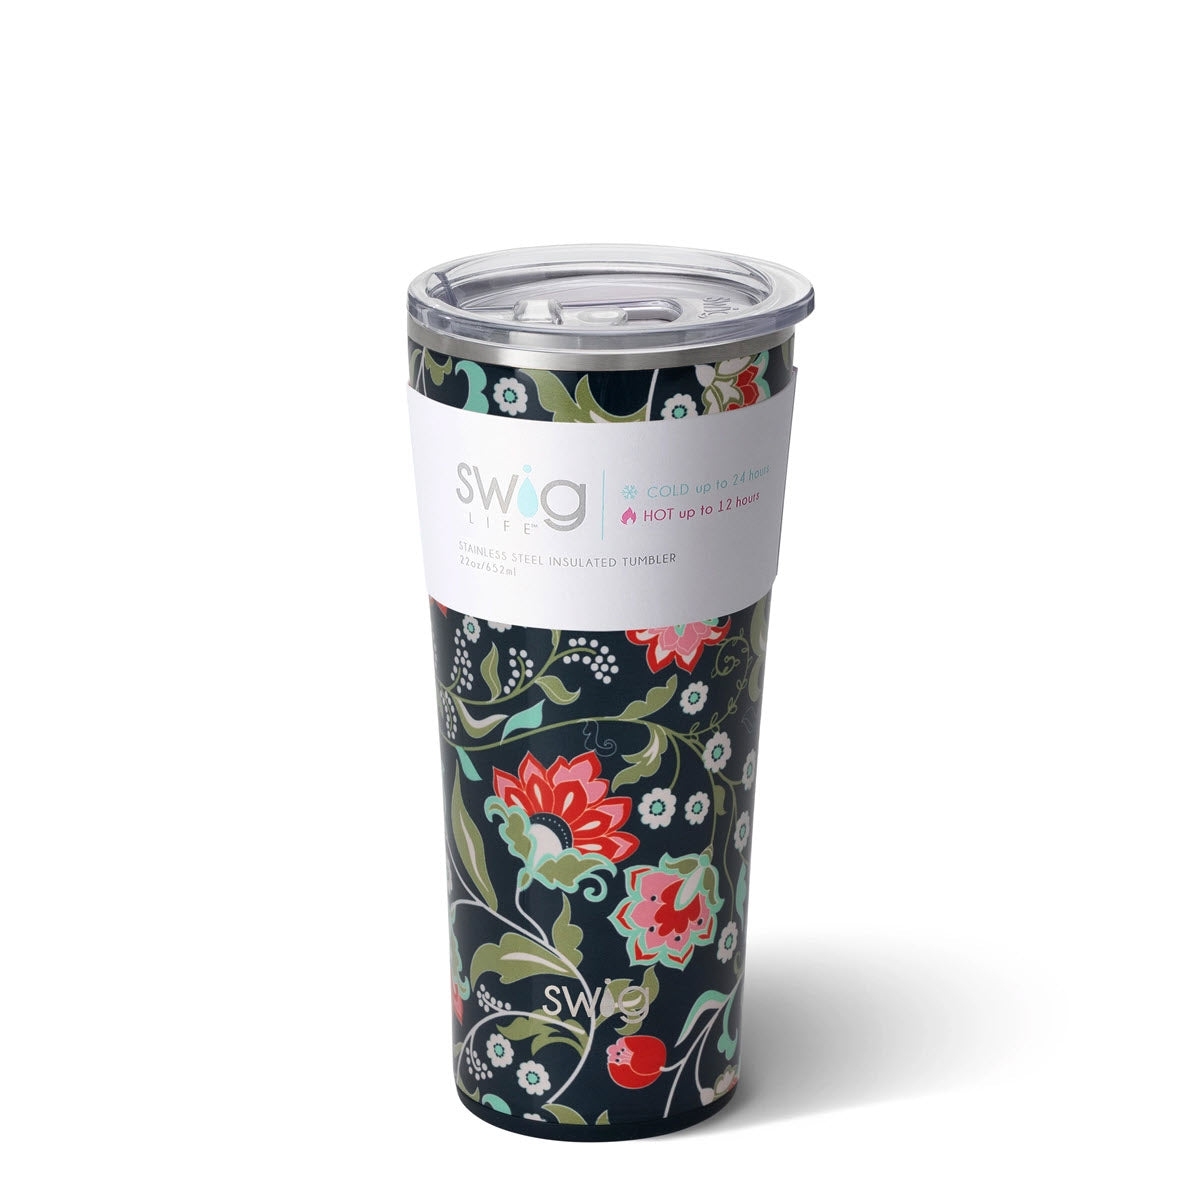 A floral patterned Swig 22 Oz Tumbler Lotus Blossom with triple insulation technology on a white background.